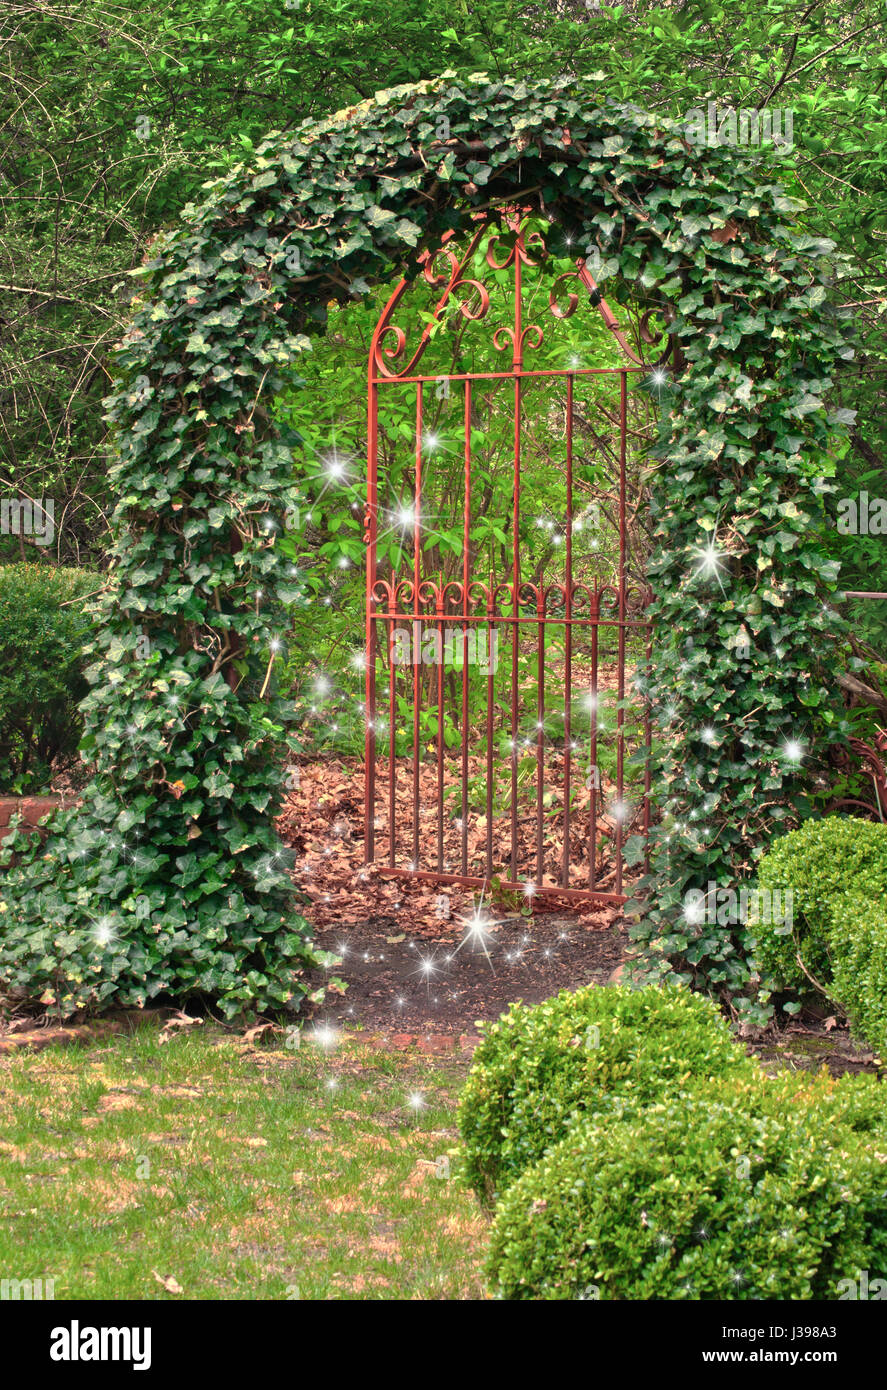 Wrought Iron Gate covered in ivy and fairies dancing in garden Stock Photo